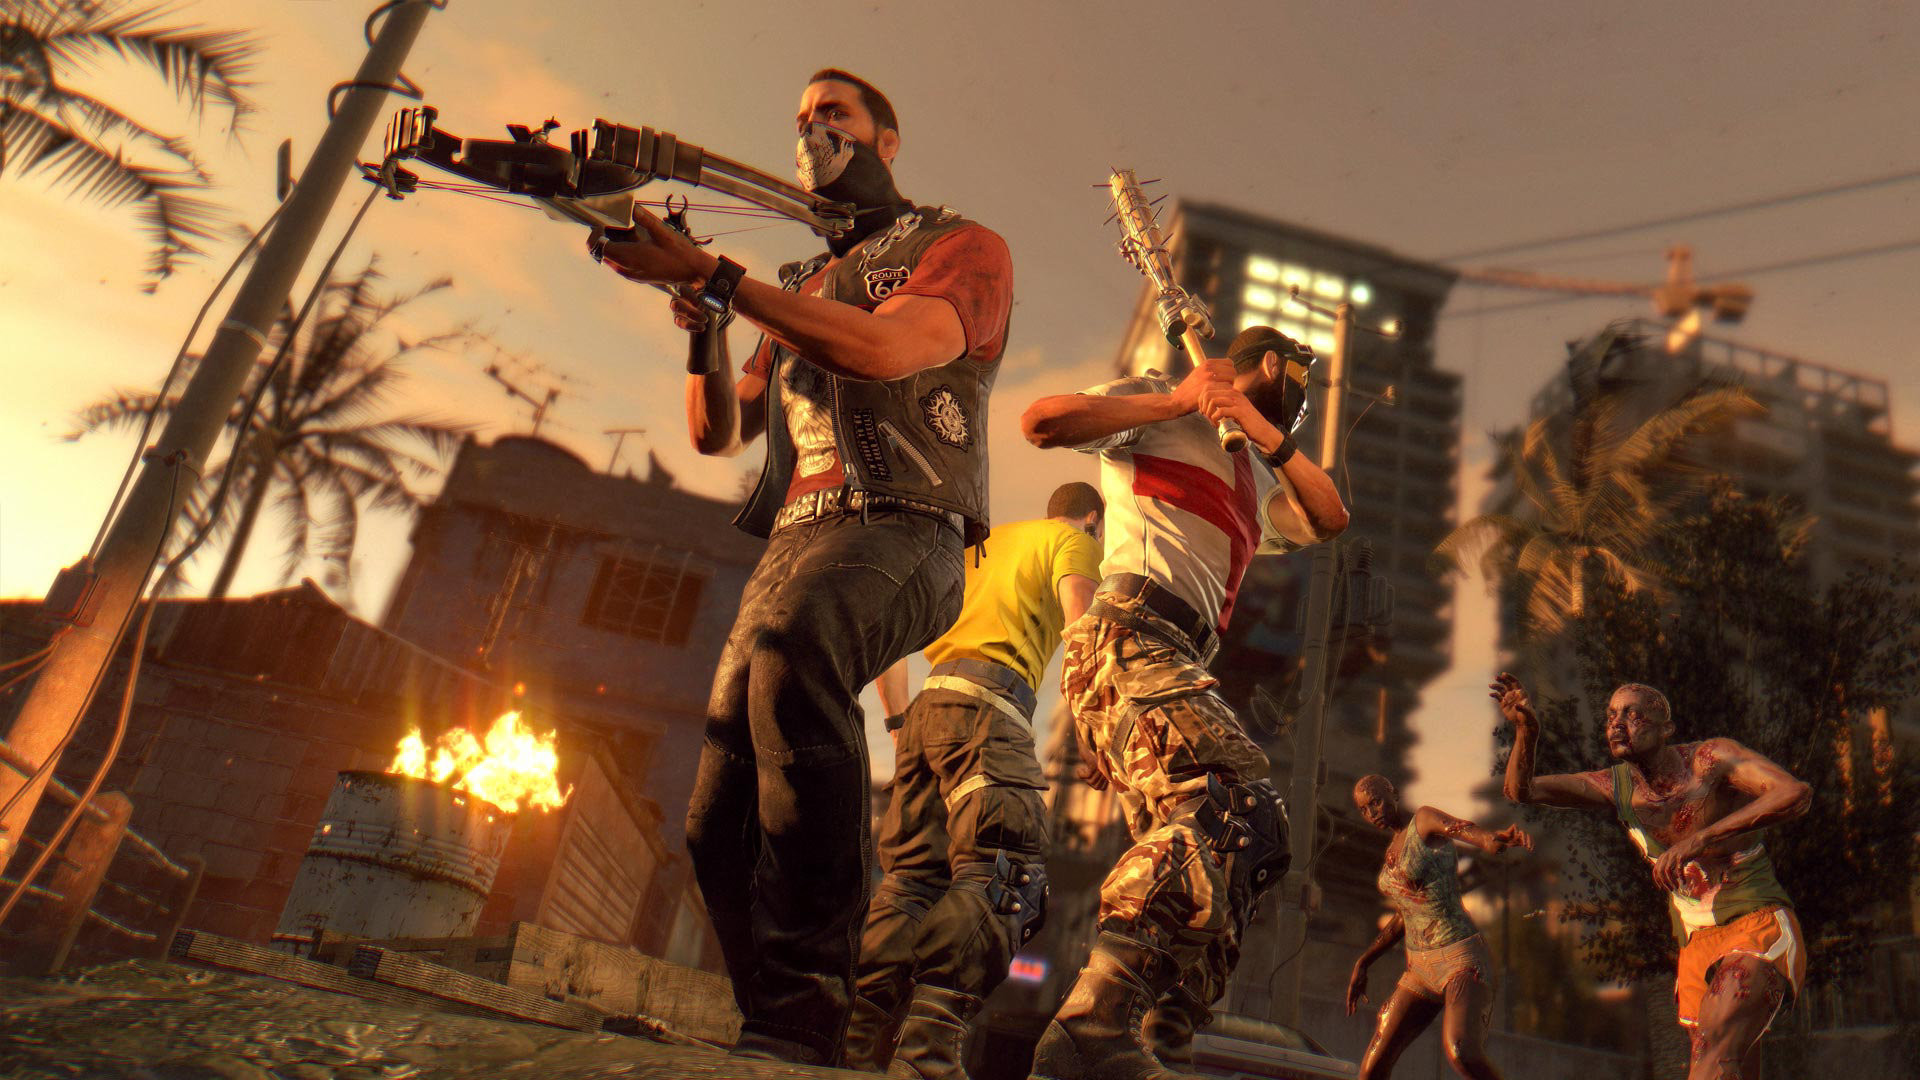 Dying Light Definitive Edition Upgrade